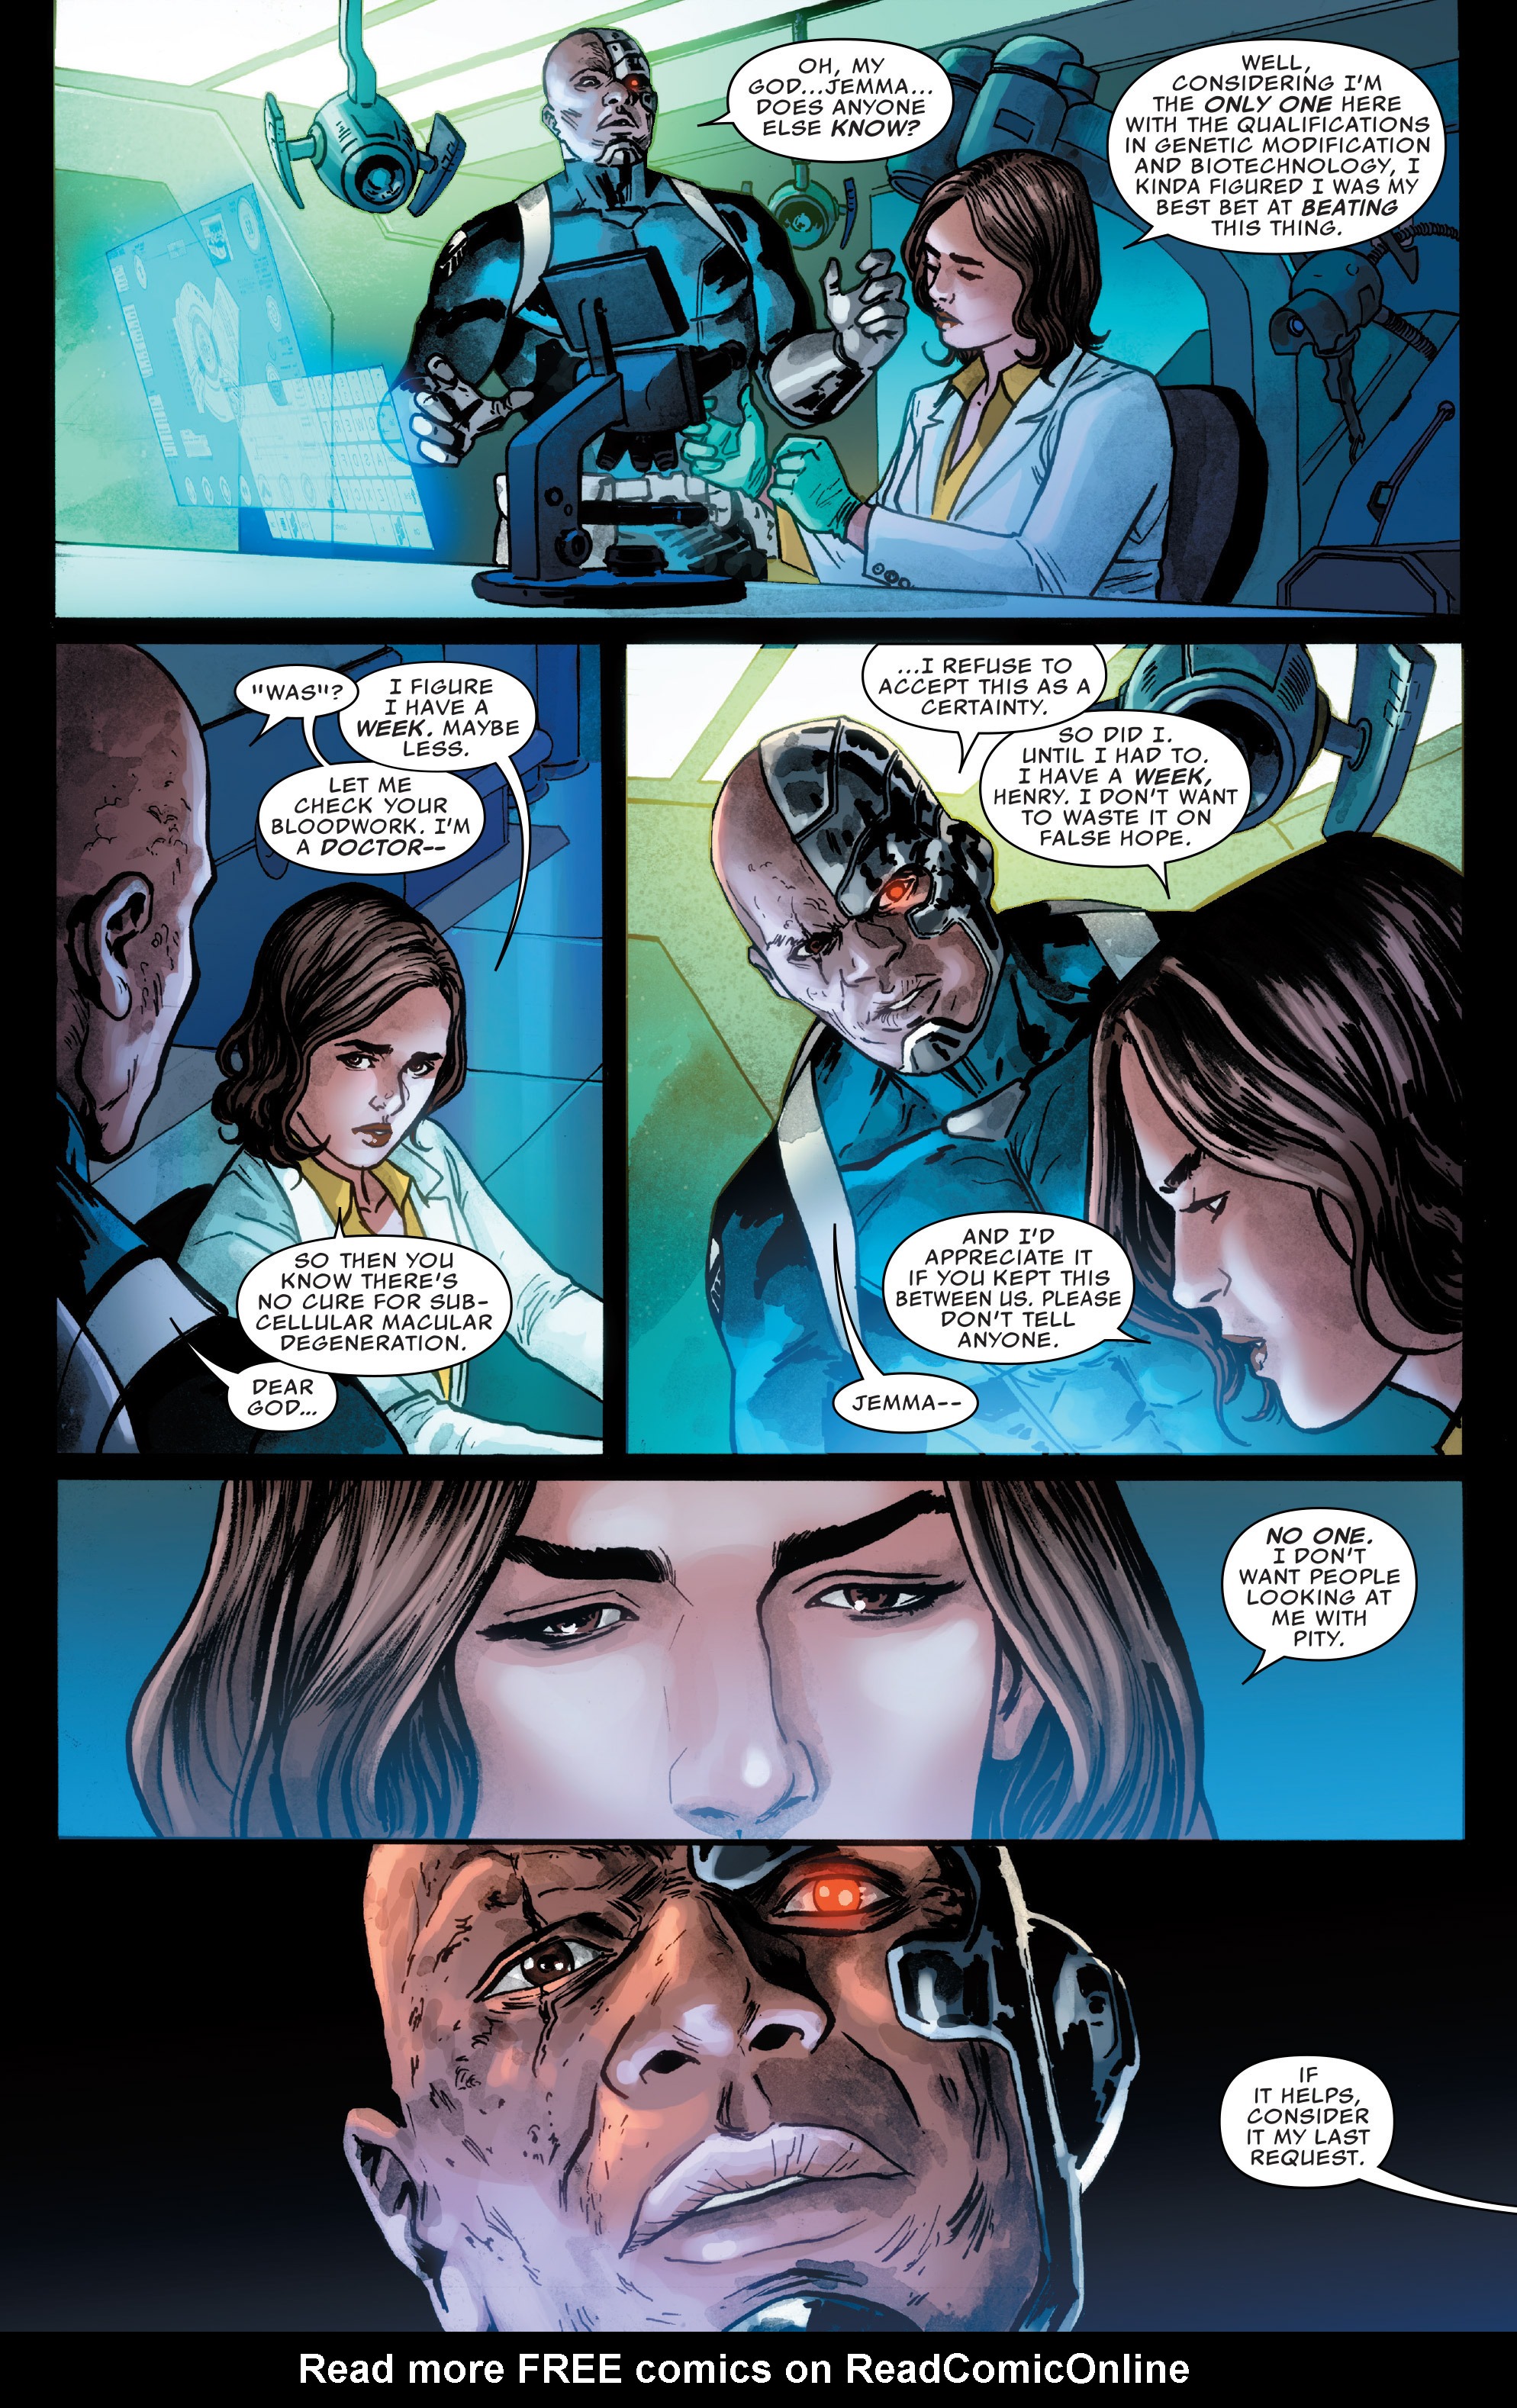 Agents Of S H I E L D Issue 5 | Read Agents Of S H I E L D Issue 5 comic  online in high quality. Read Full Comic online for free - Read comics  online in high quality .|